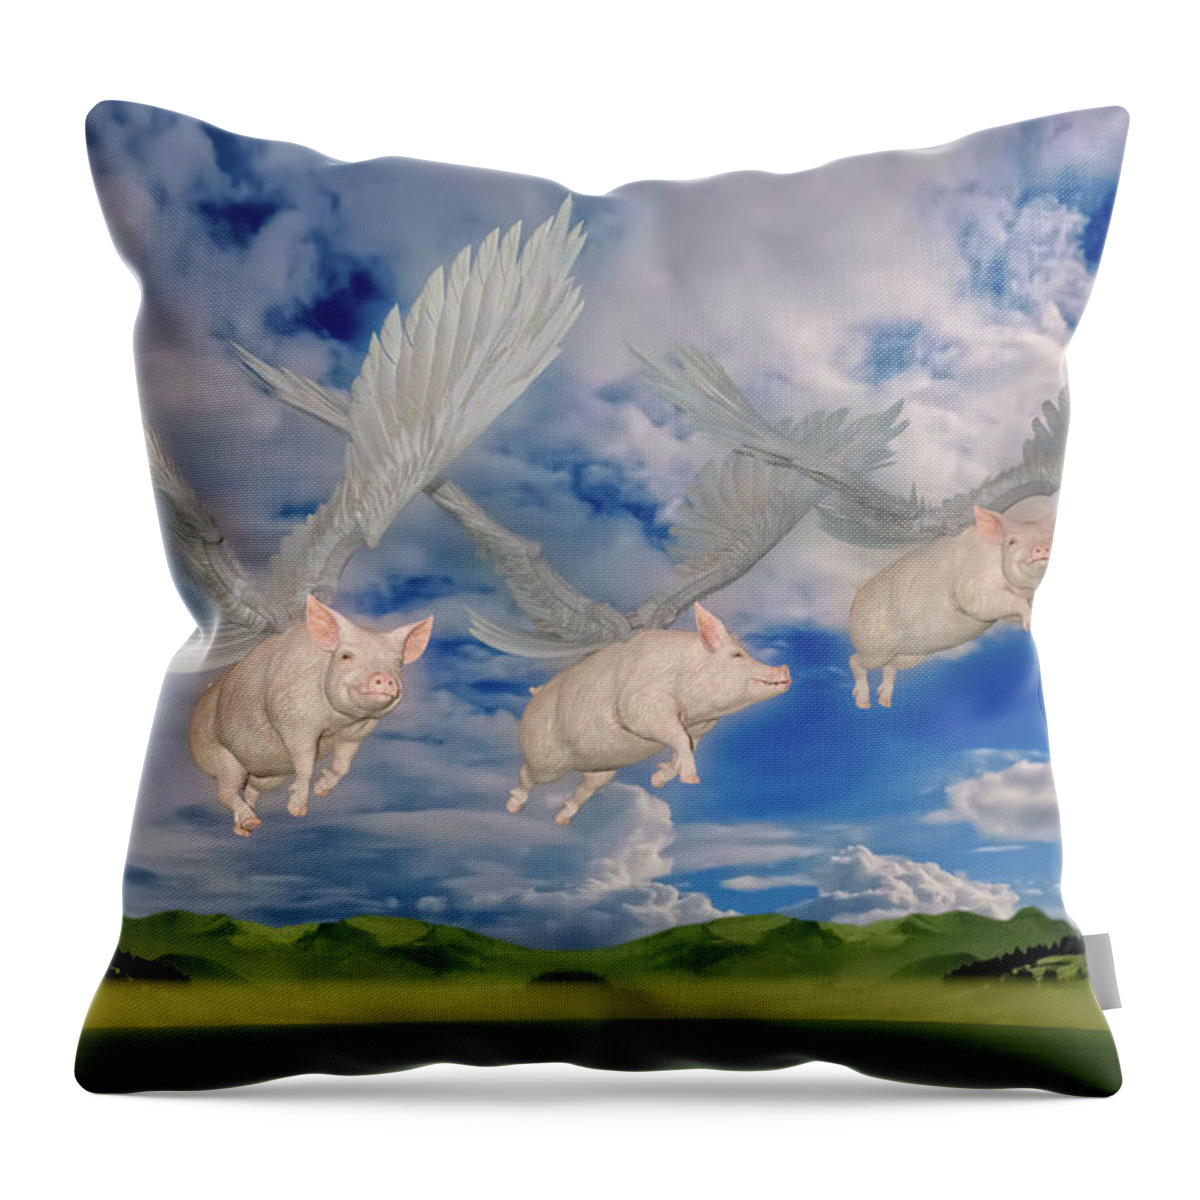 Pig Throw Pillow featuring the digital art When Pigs Fly by Betsy Knapp